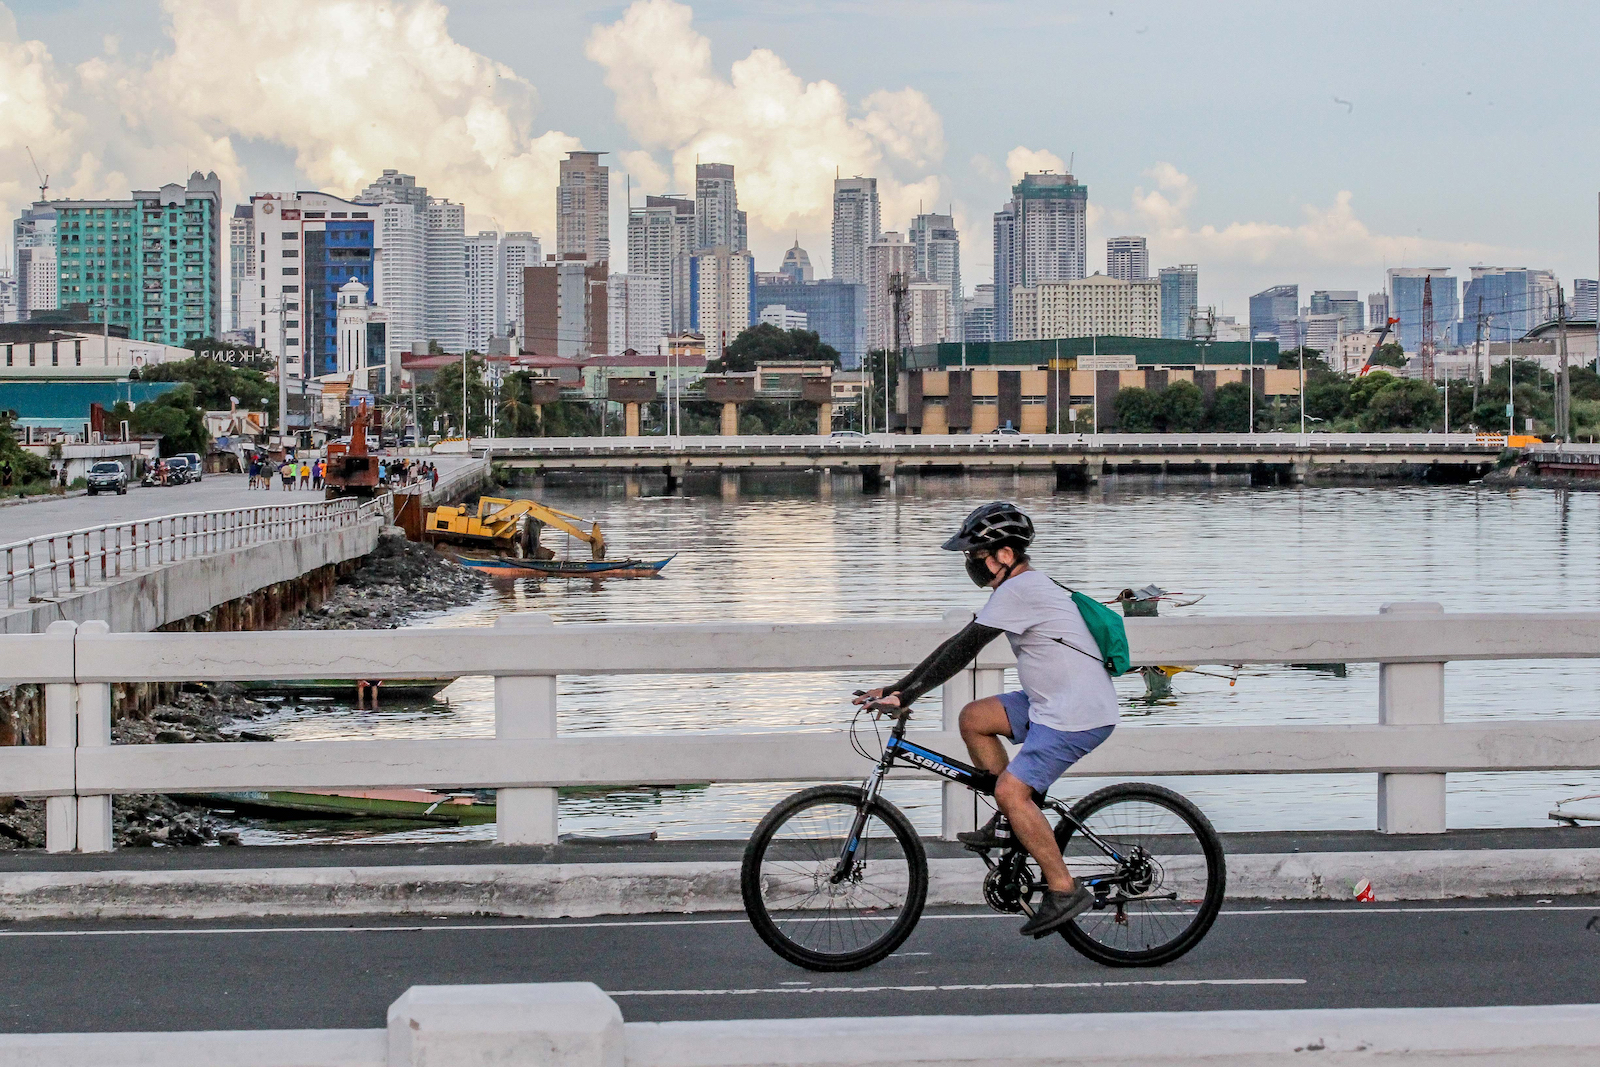 a person in a COVID mask rides a bike past a city near water